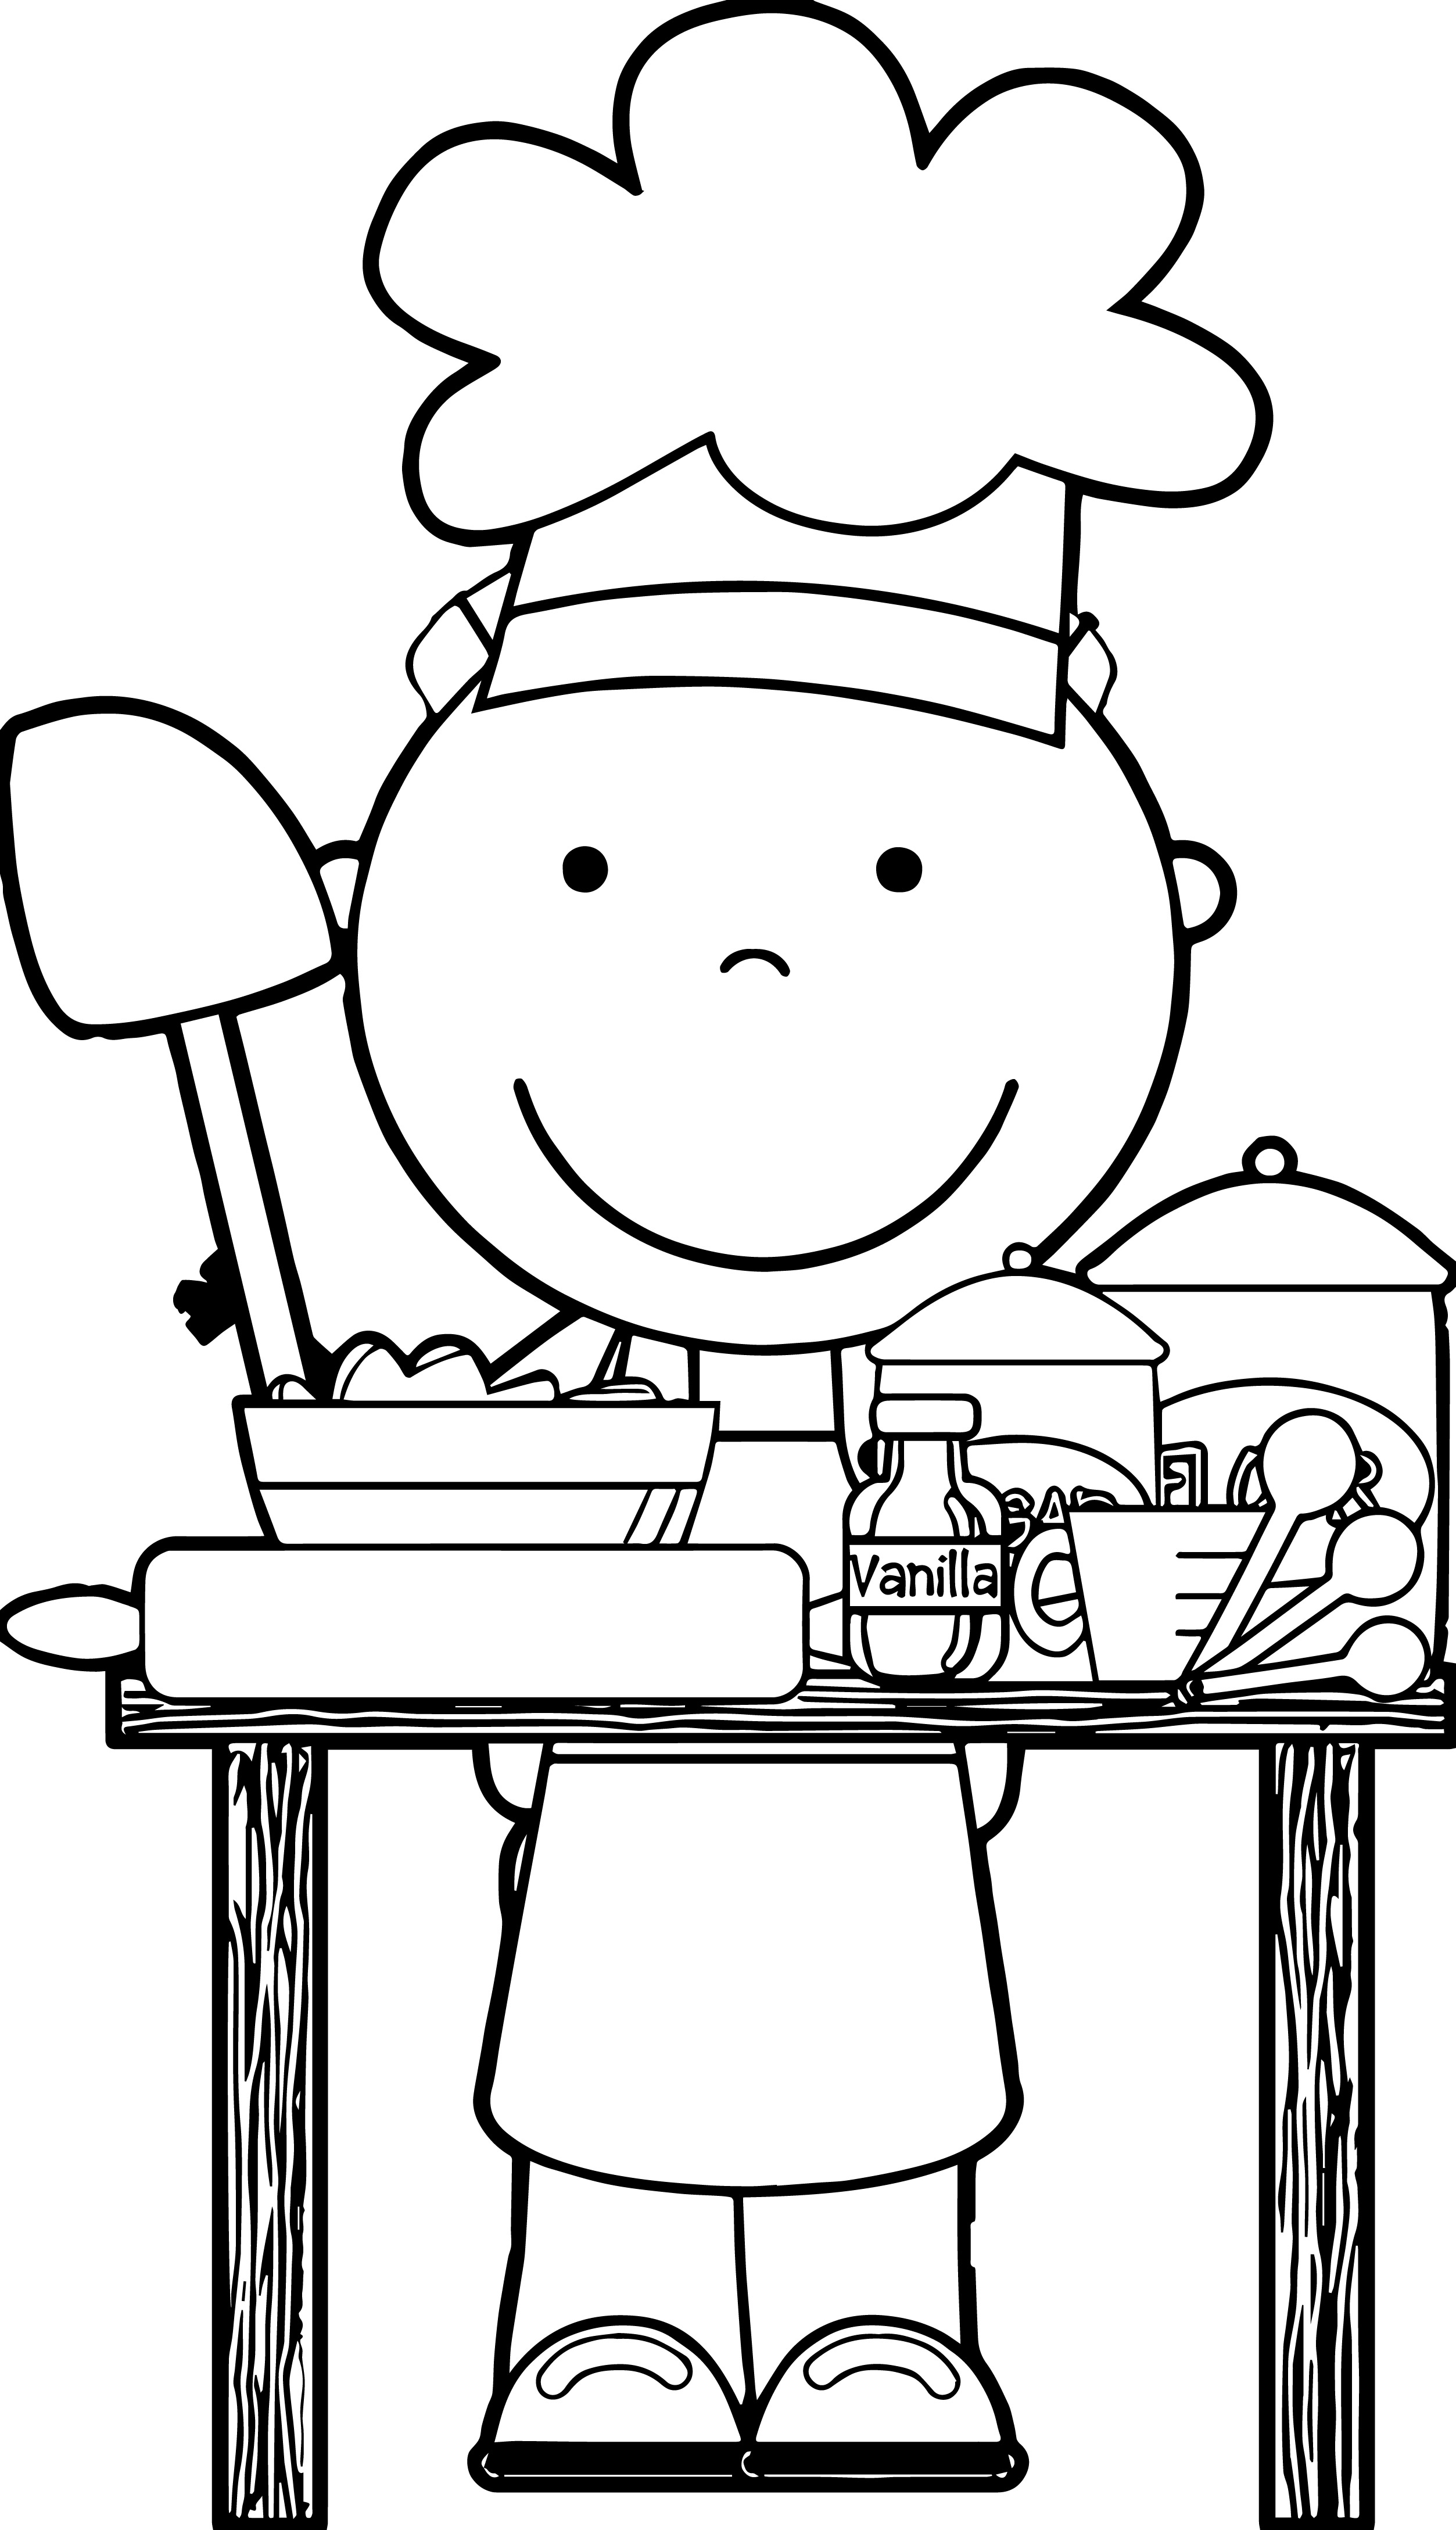 Cute kid chef clipart black and white 